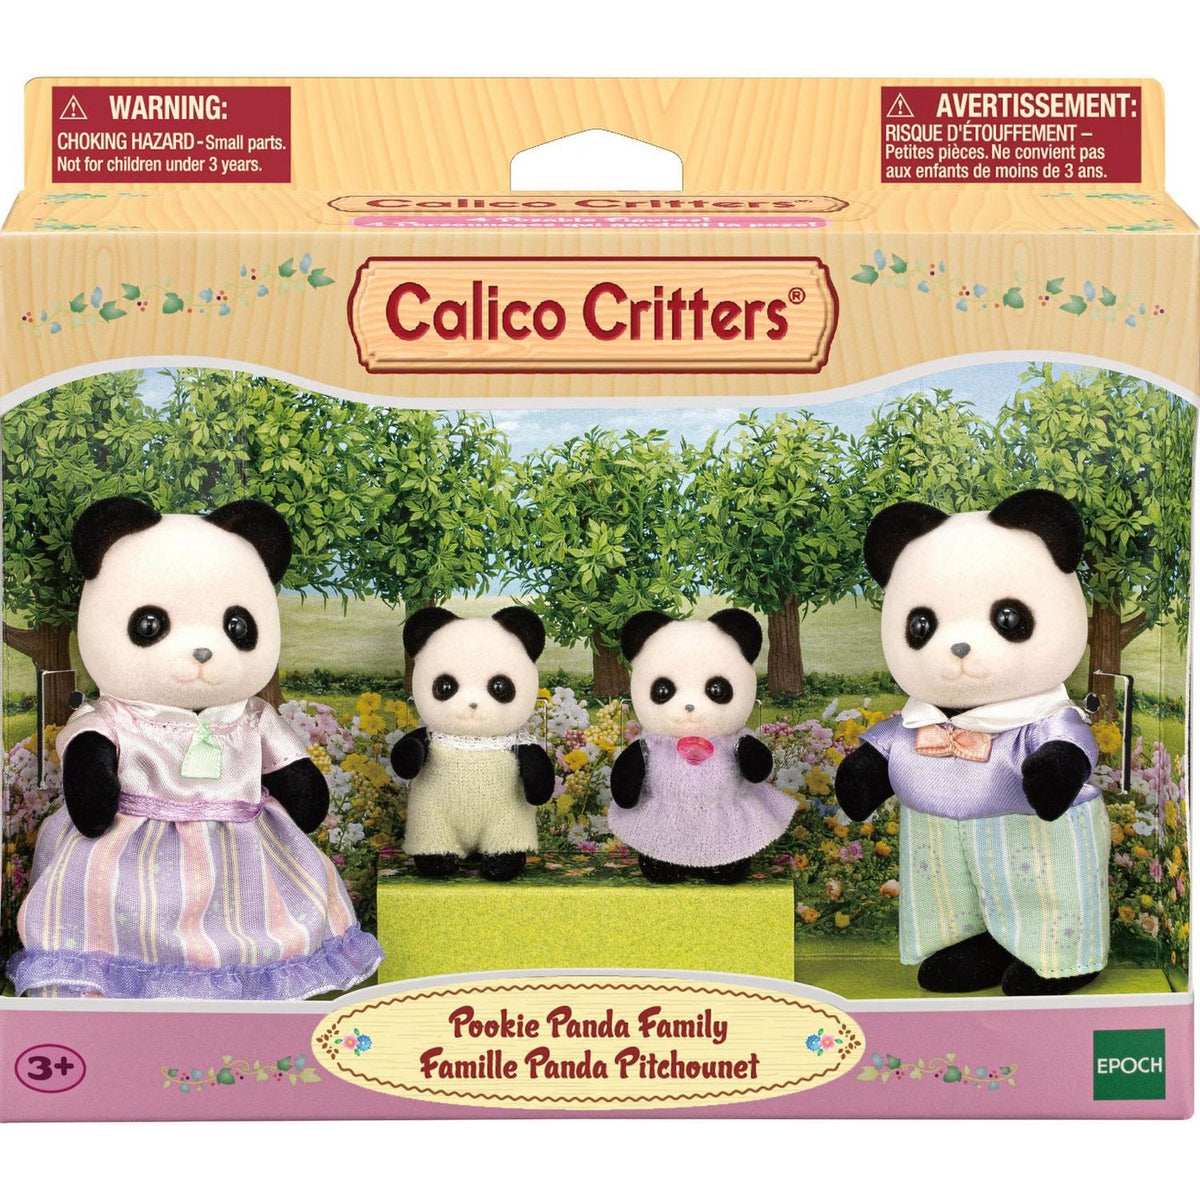 Calico Critters outback koala family – Dilly Dally Kids